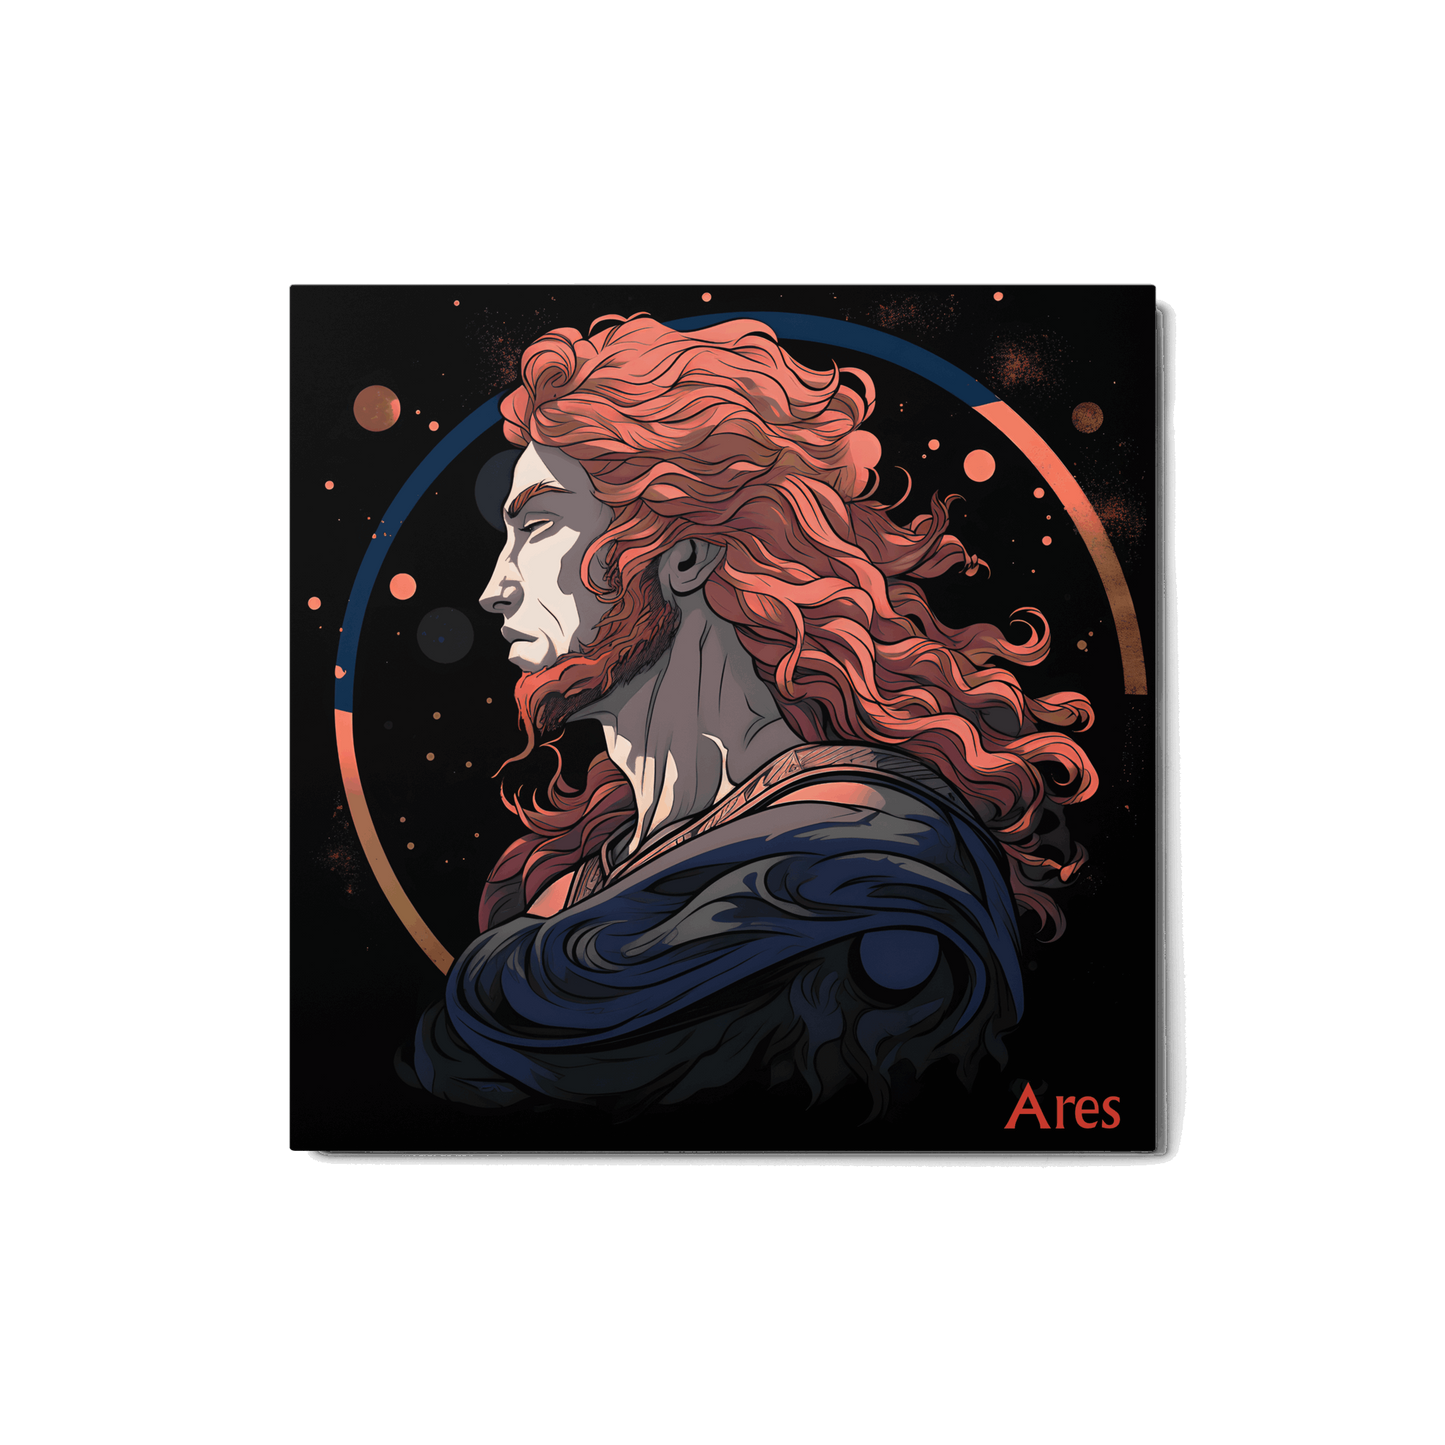 Ares' Courage - Colorful Hanging Wall Art High Quality Metal Print DrawDadDraw